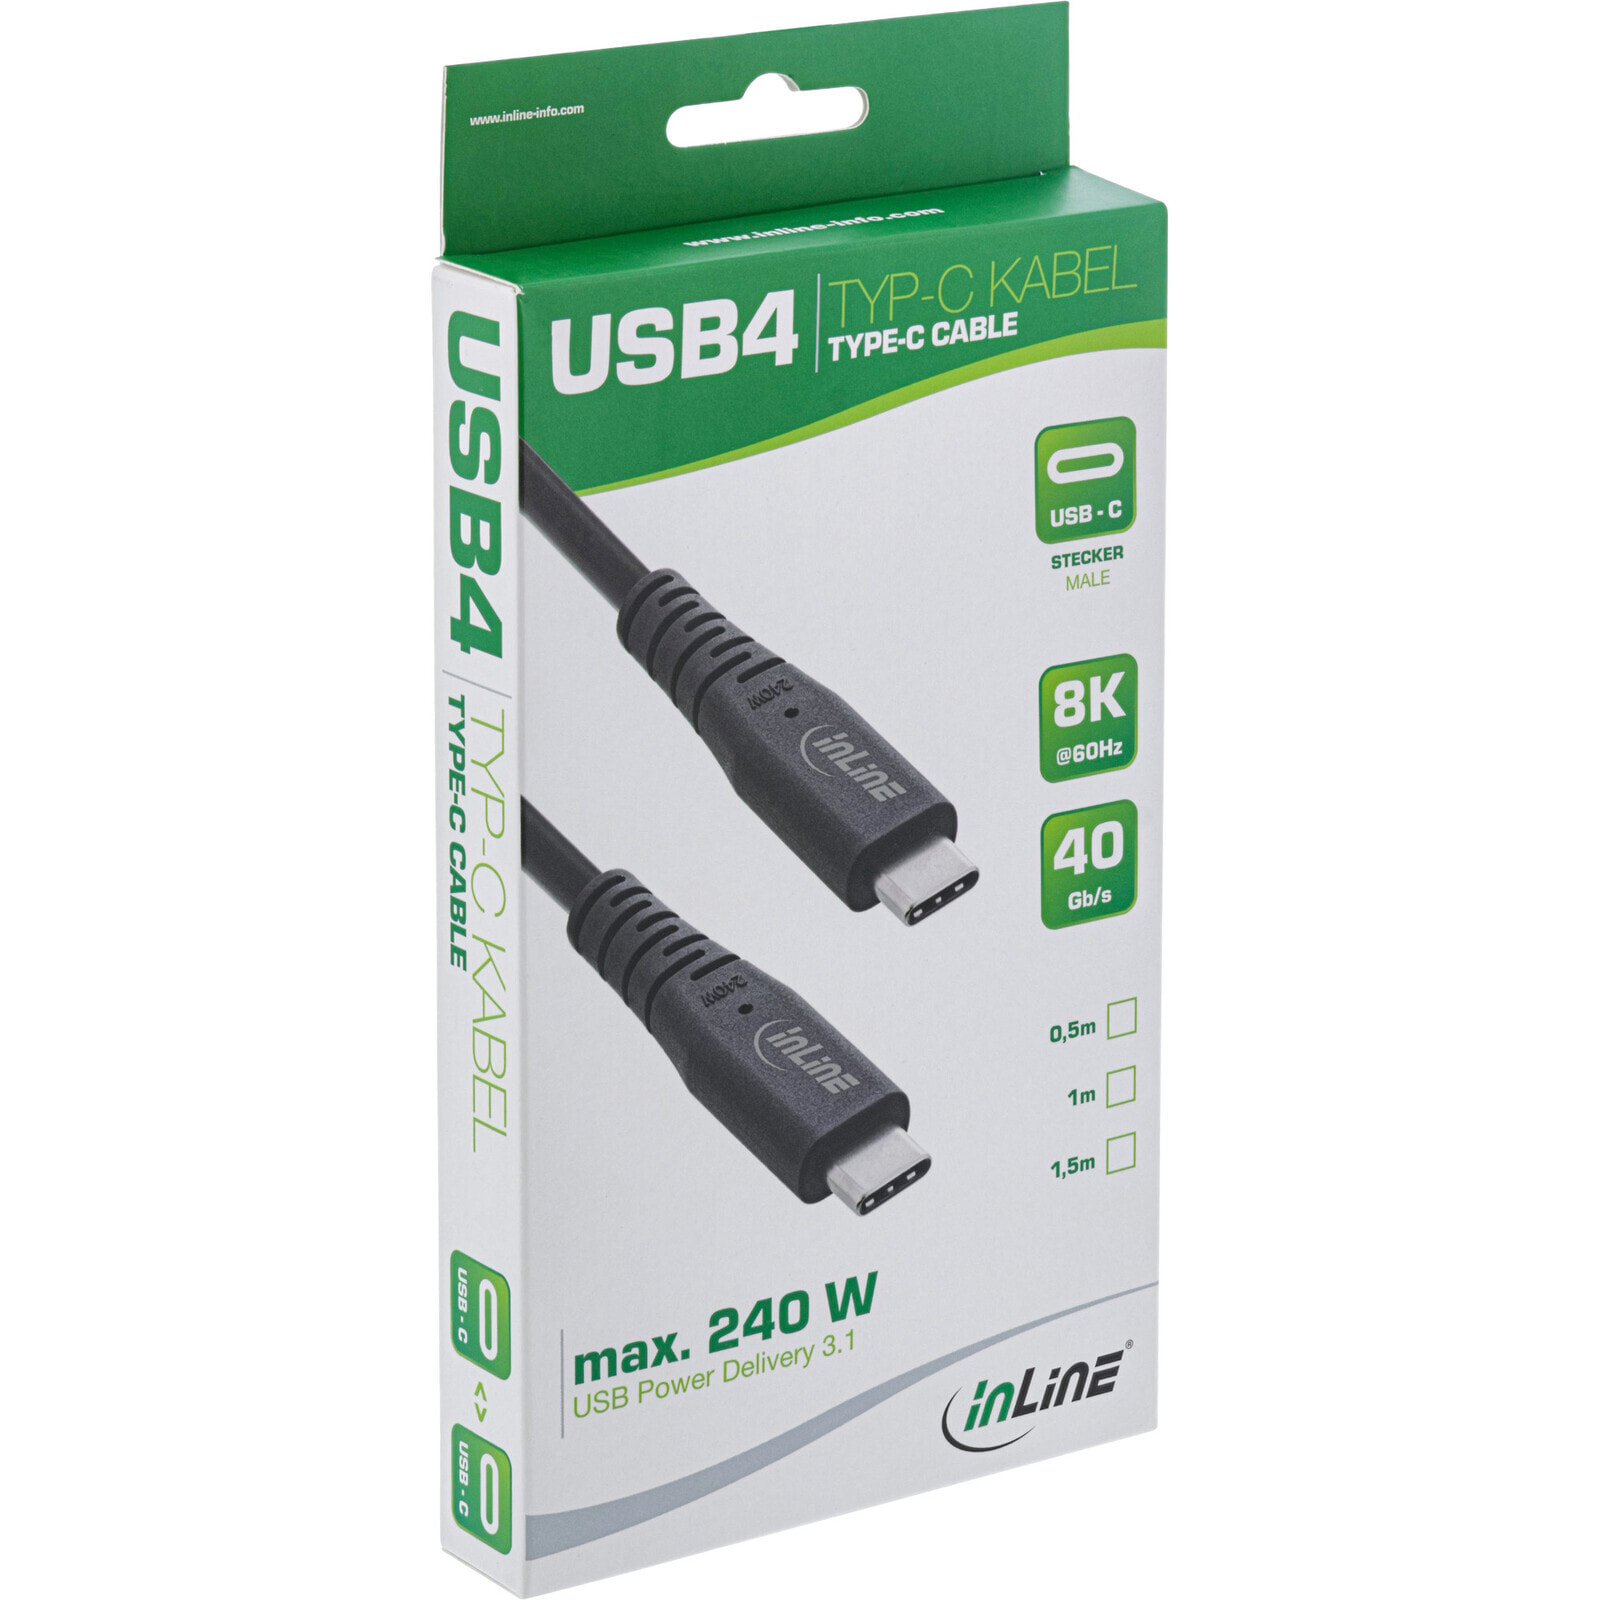 InLine USB4 cable - USB Type-C male/male - PD 240W - 8K60Hz - TPE black 0.5m - 0.5 m - USB C - USB C - USB4 Gen 3x2 - 40000 Mbit/s - Black